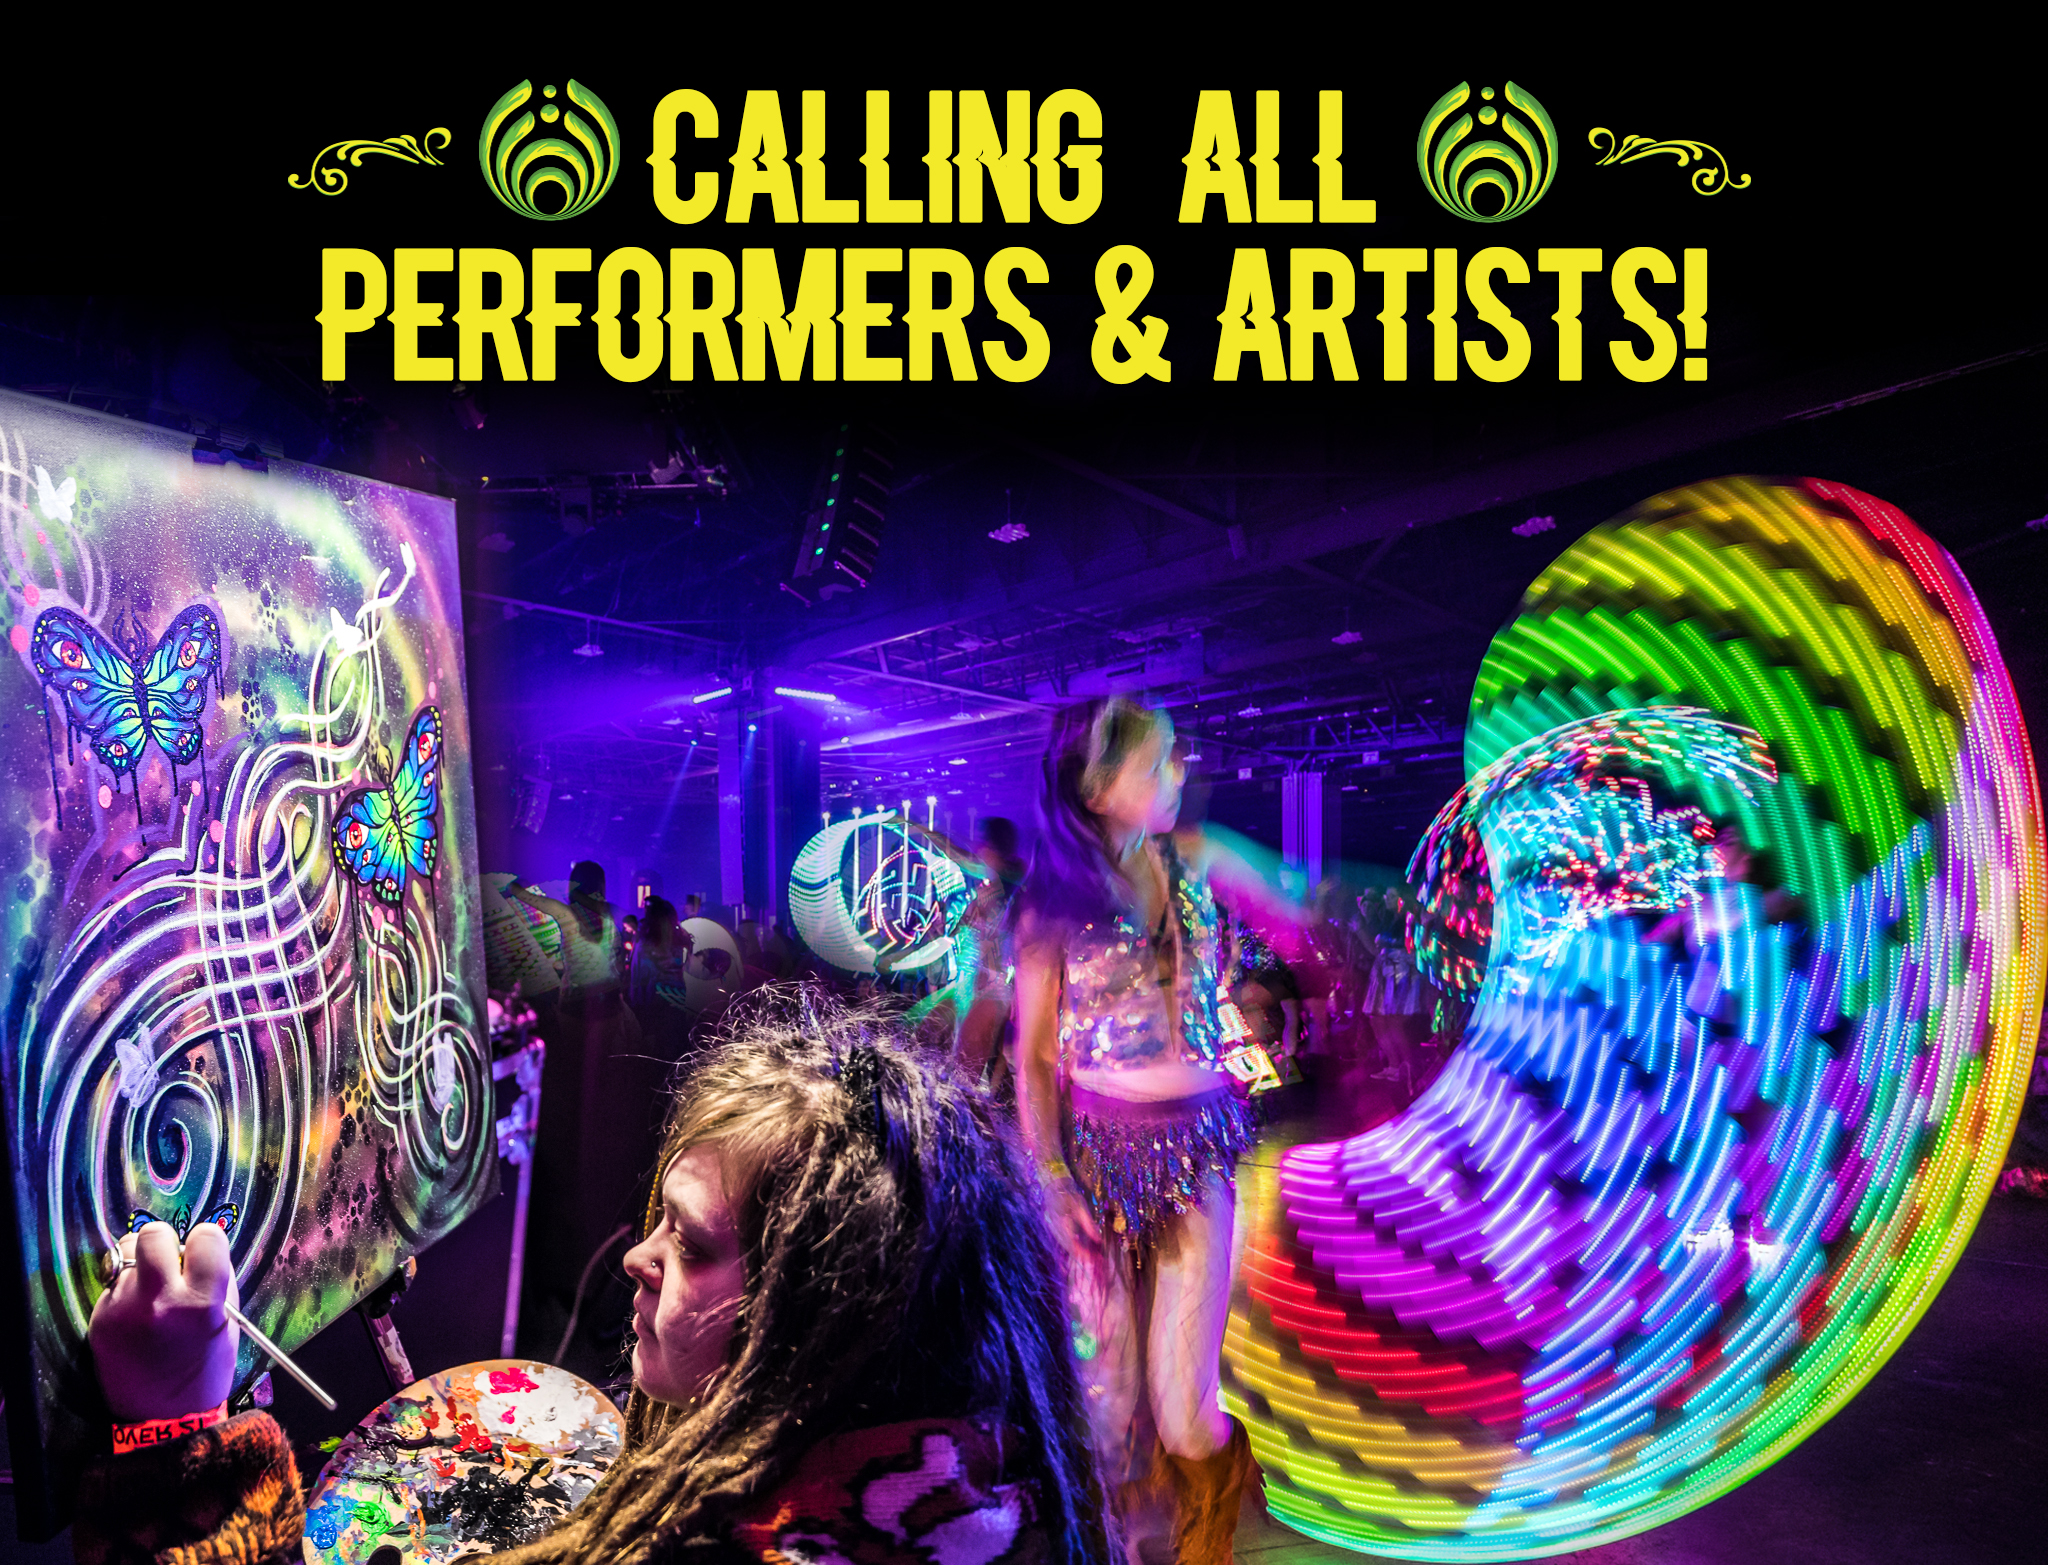 SPRING GATHERING 2018 Art and Performance Applications